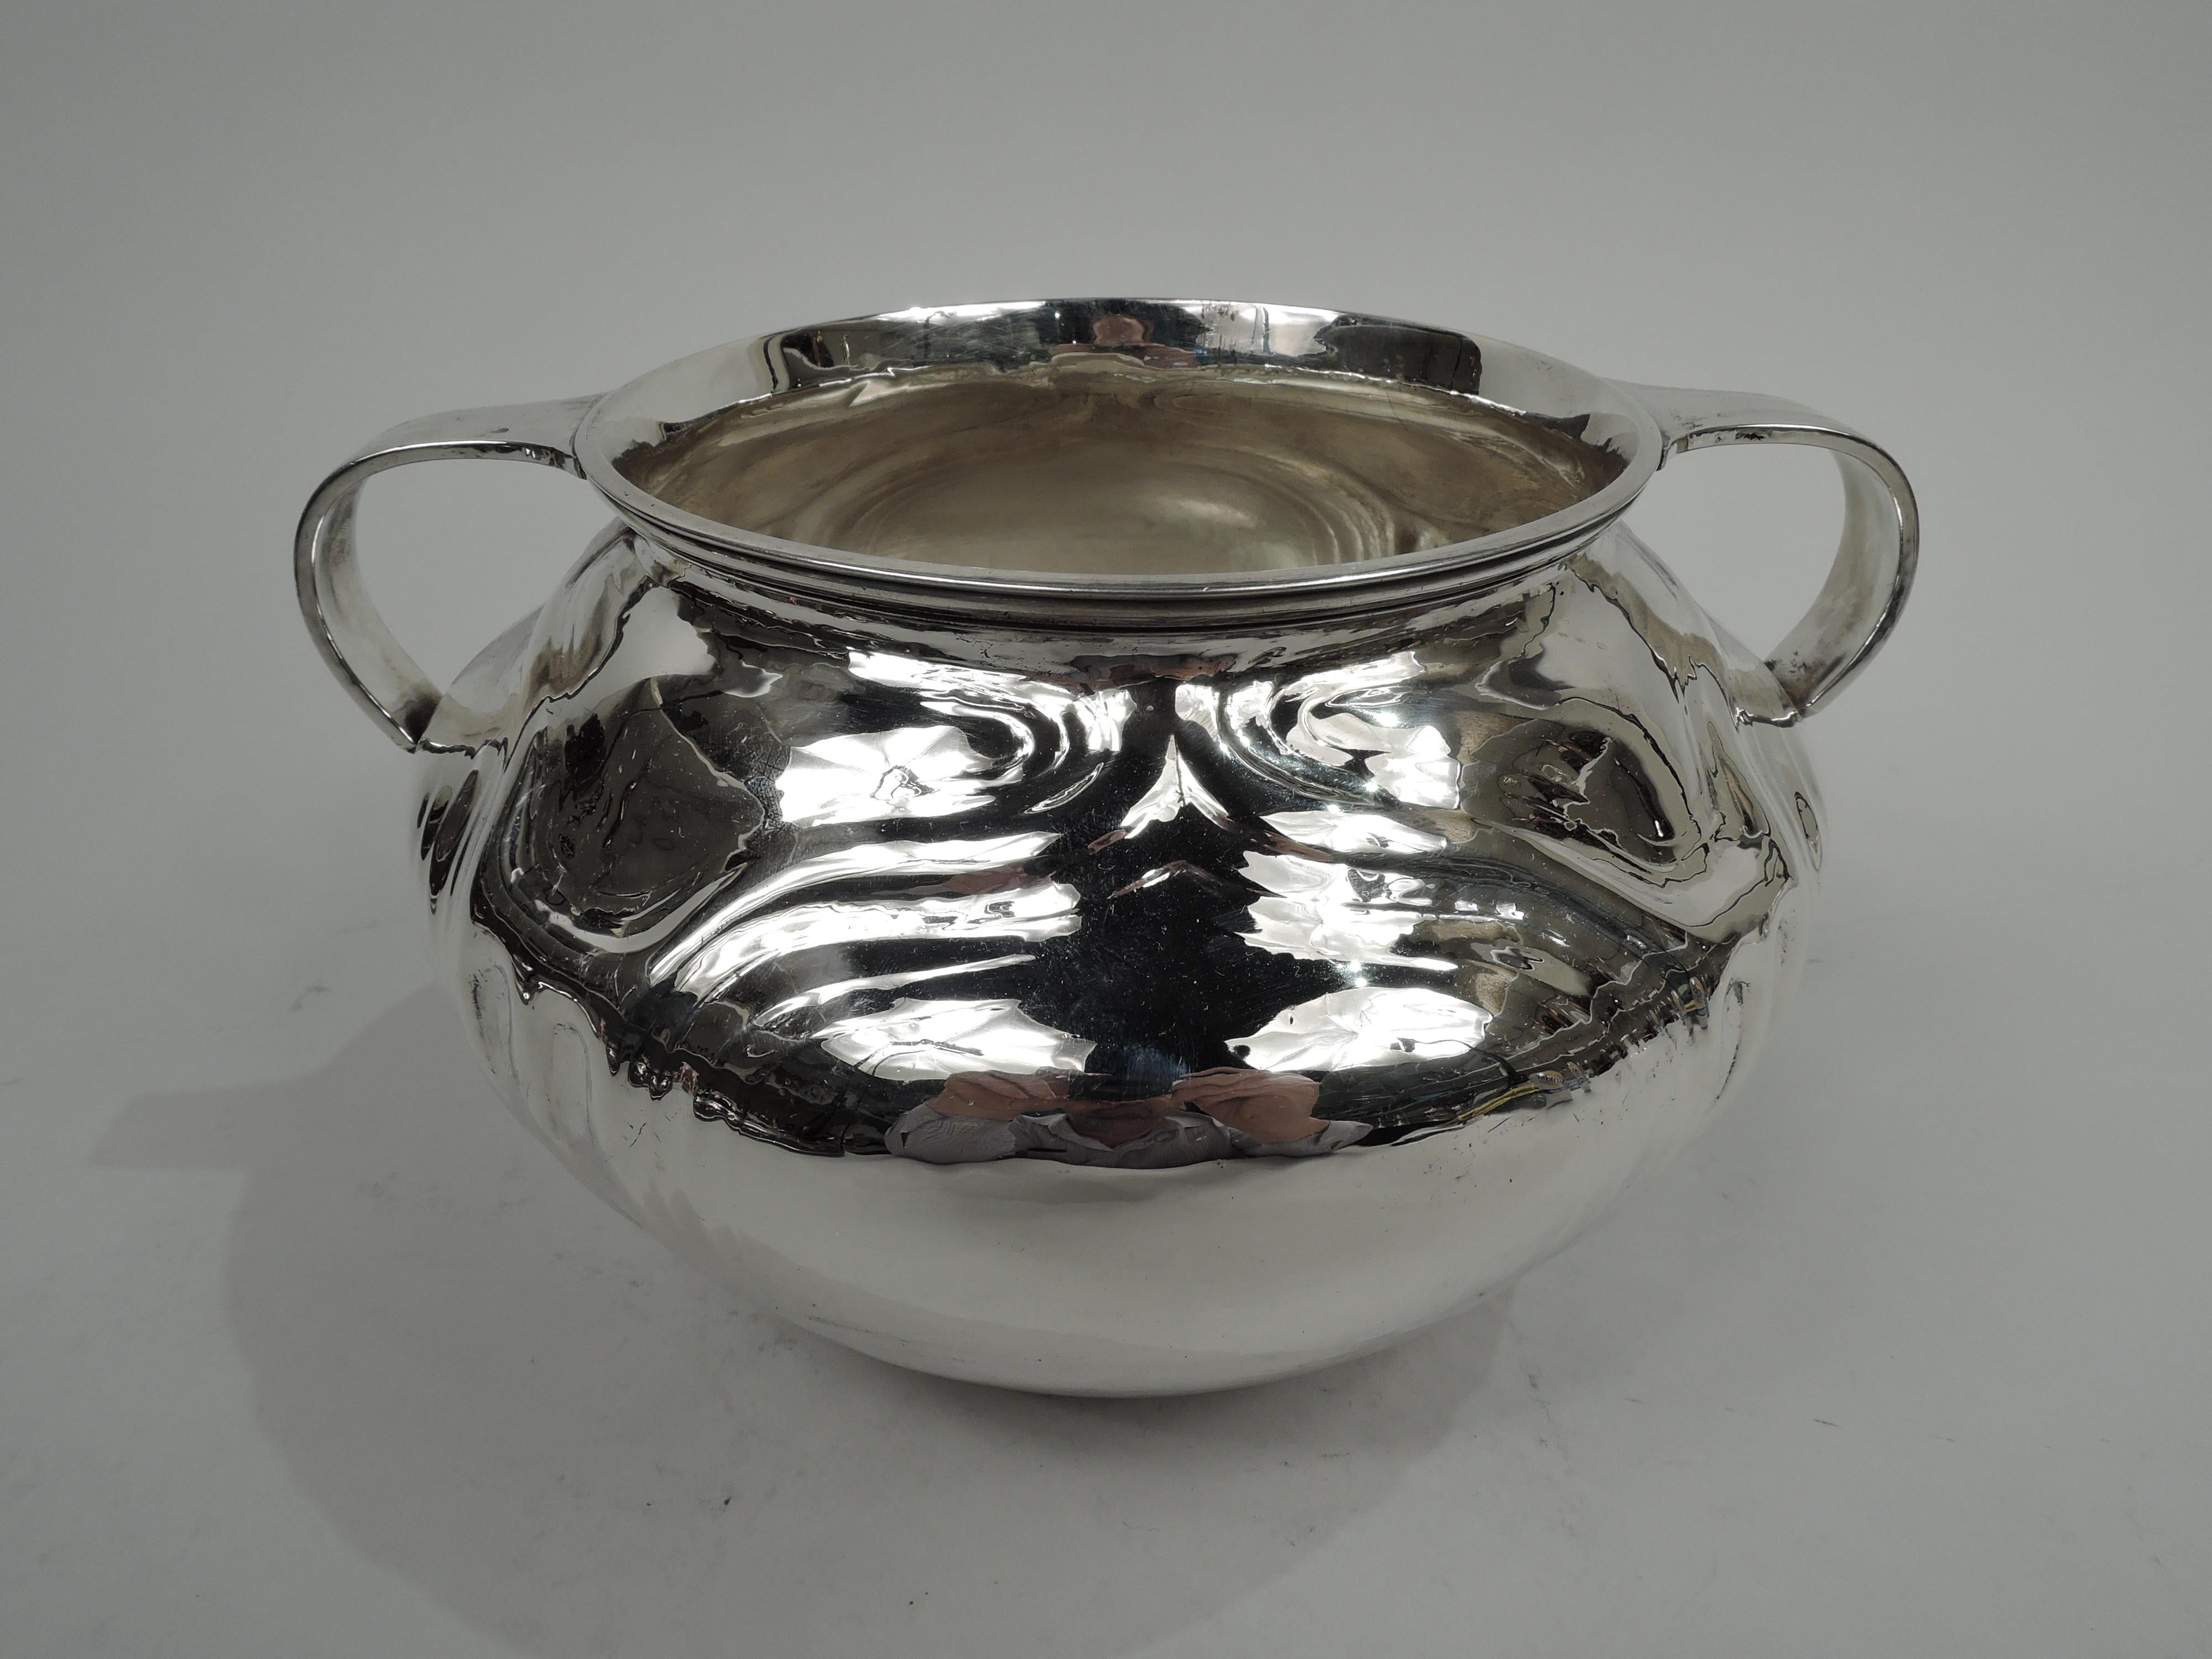 Craftsman sterling silver bowl. Made by Lebkuecher in Newark, circa 1920. Ovoid with reeded rim and small c-scroll handles. Fluting and ogee-form frames (vacant). A traditional pottery form with visible hand hammering. Fully marked including maker’s